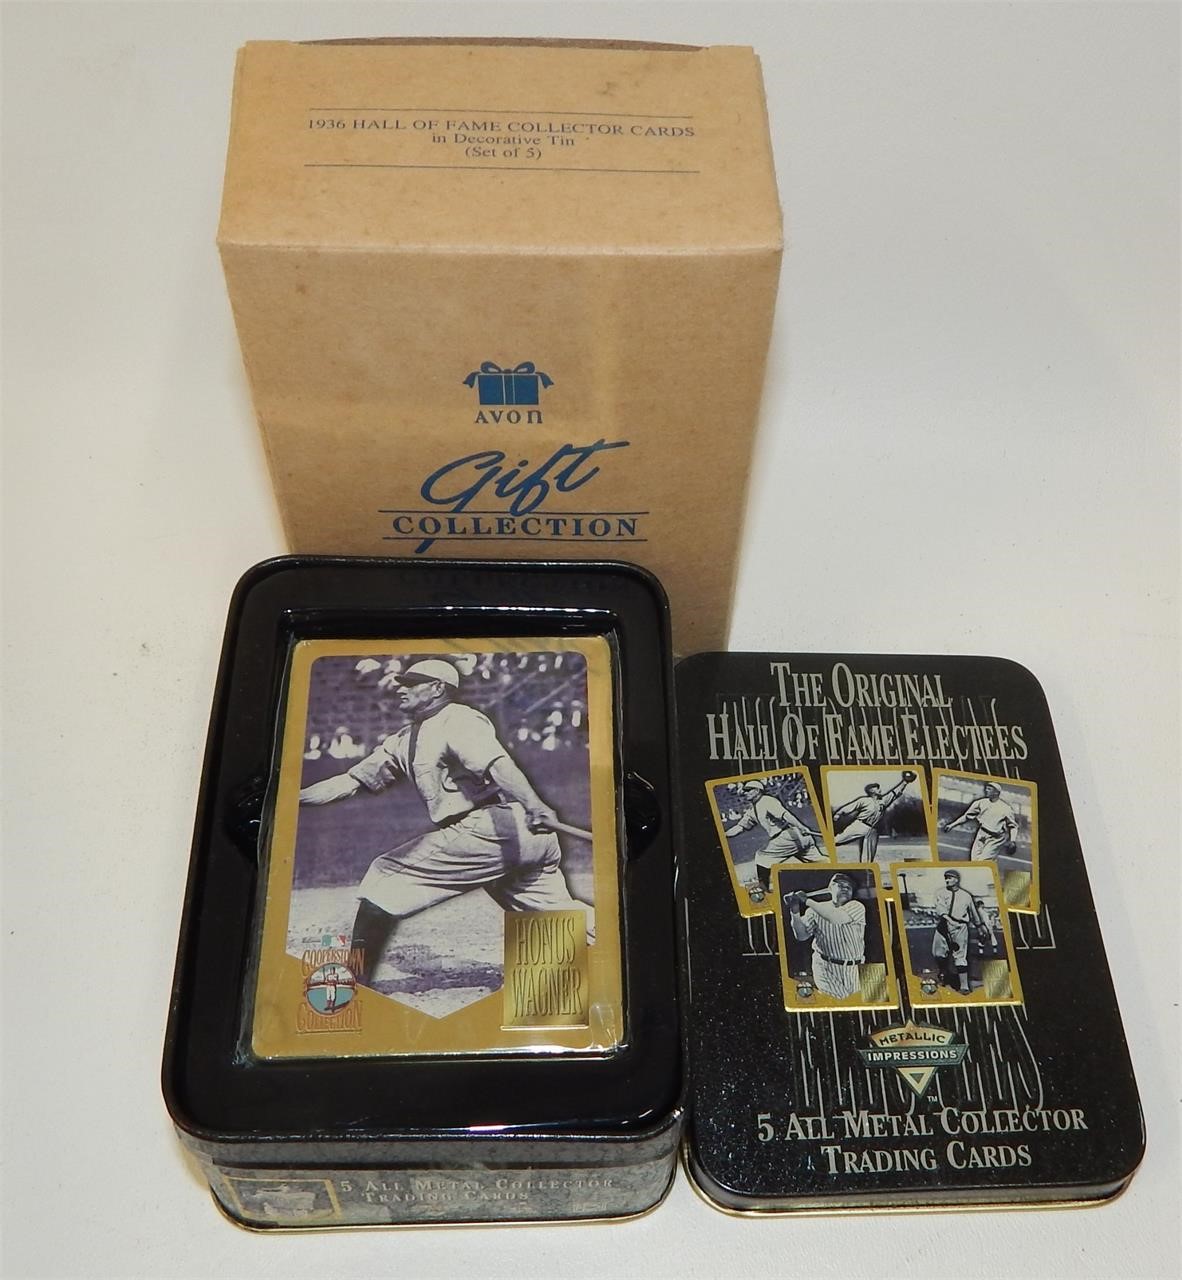 Avon Baseball Hall of Fame Collector Cards in Tin